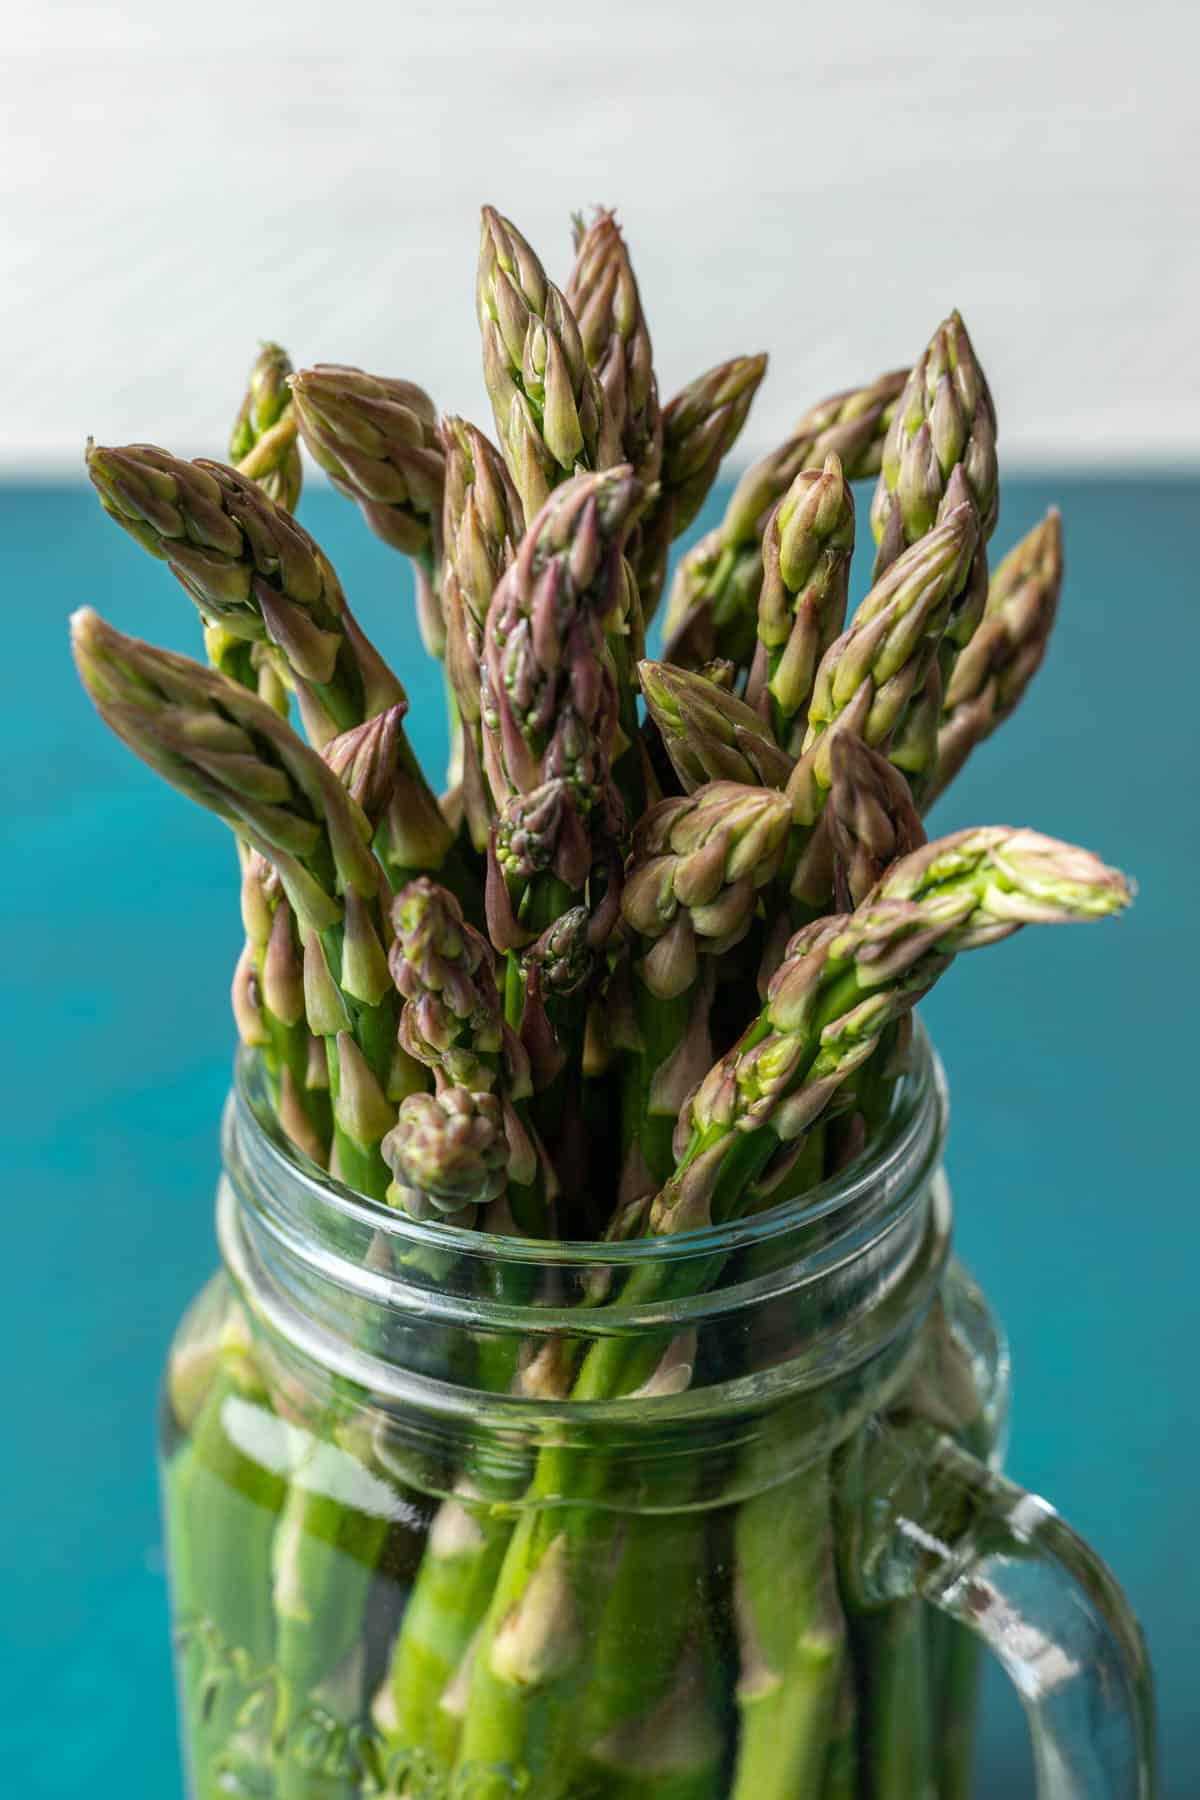 Tops of asparagus sticking out of a jar.